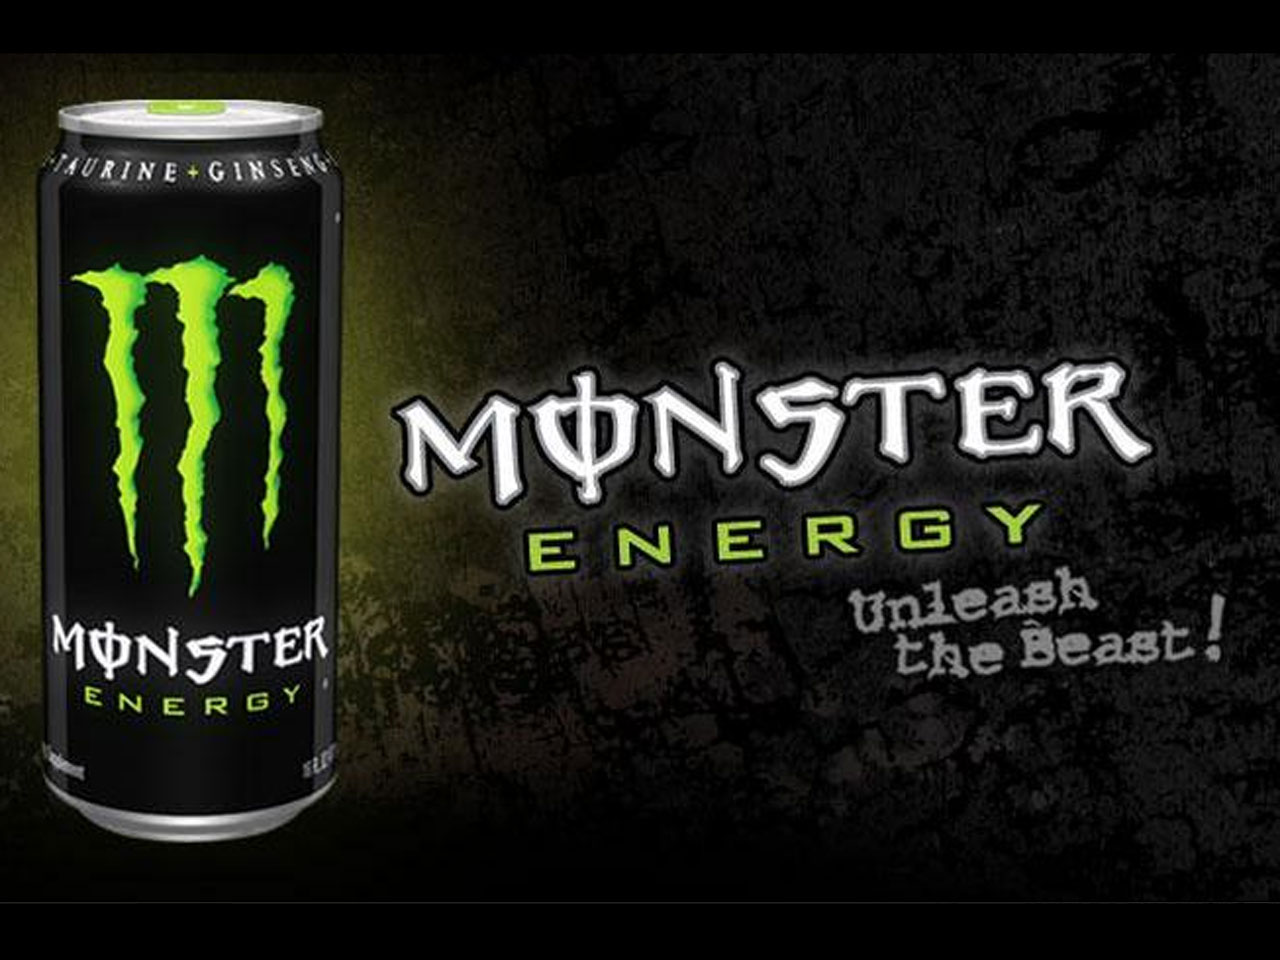 are energy drinks regulated by the fda